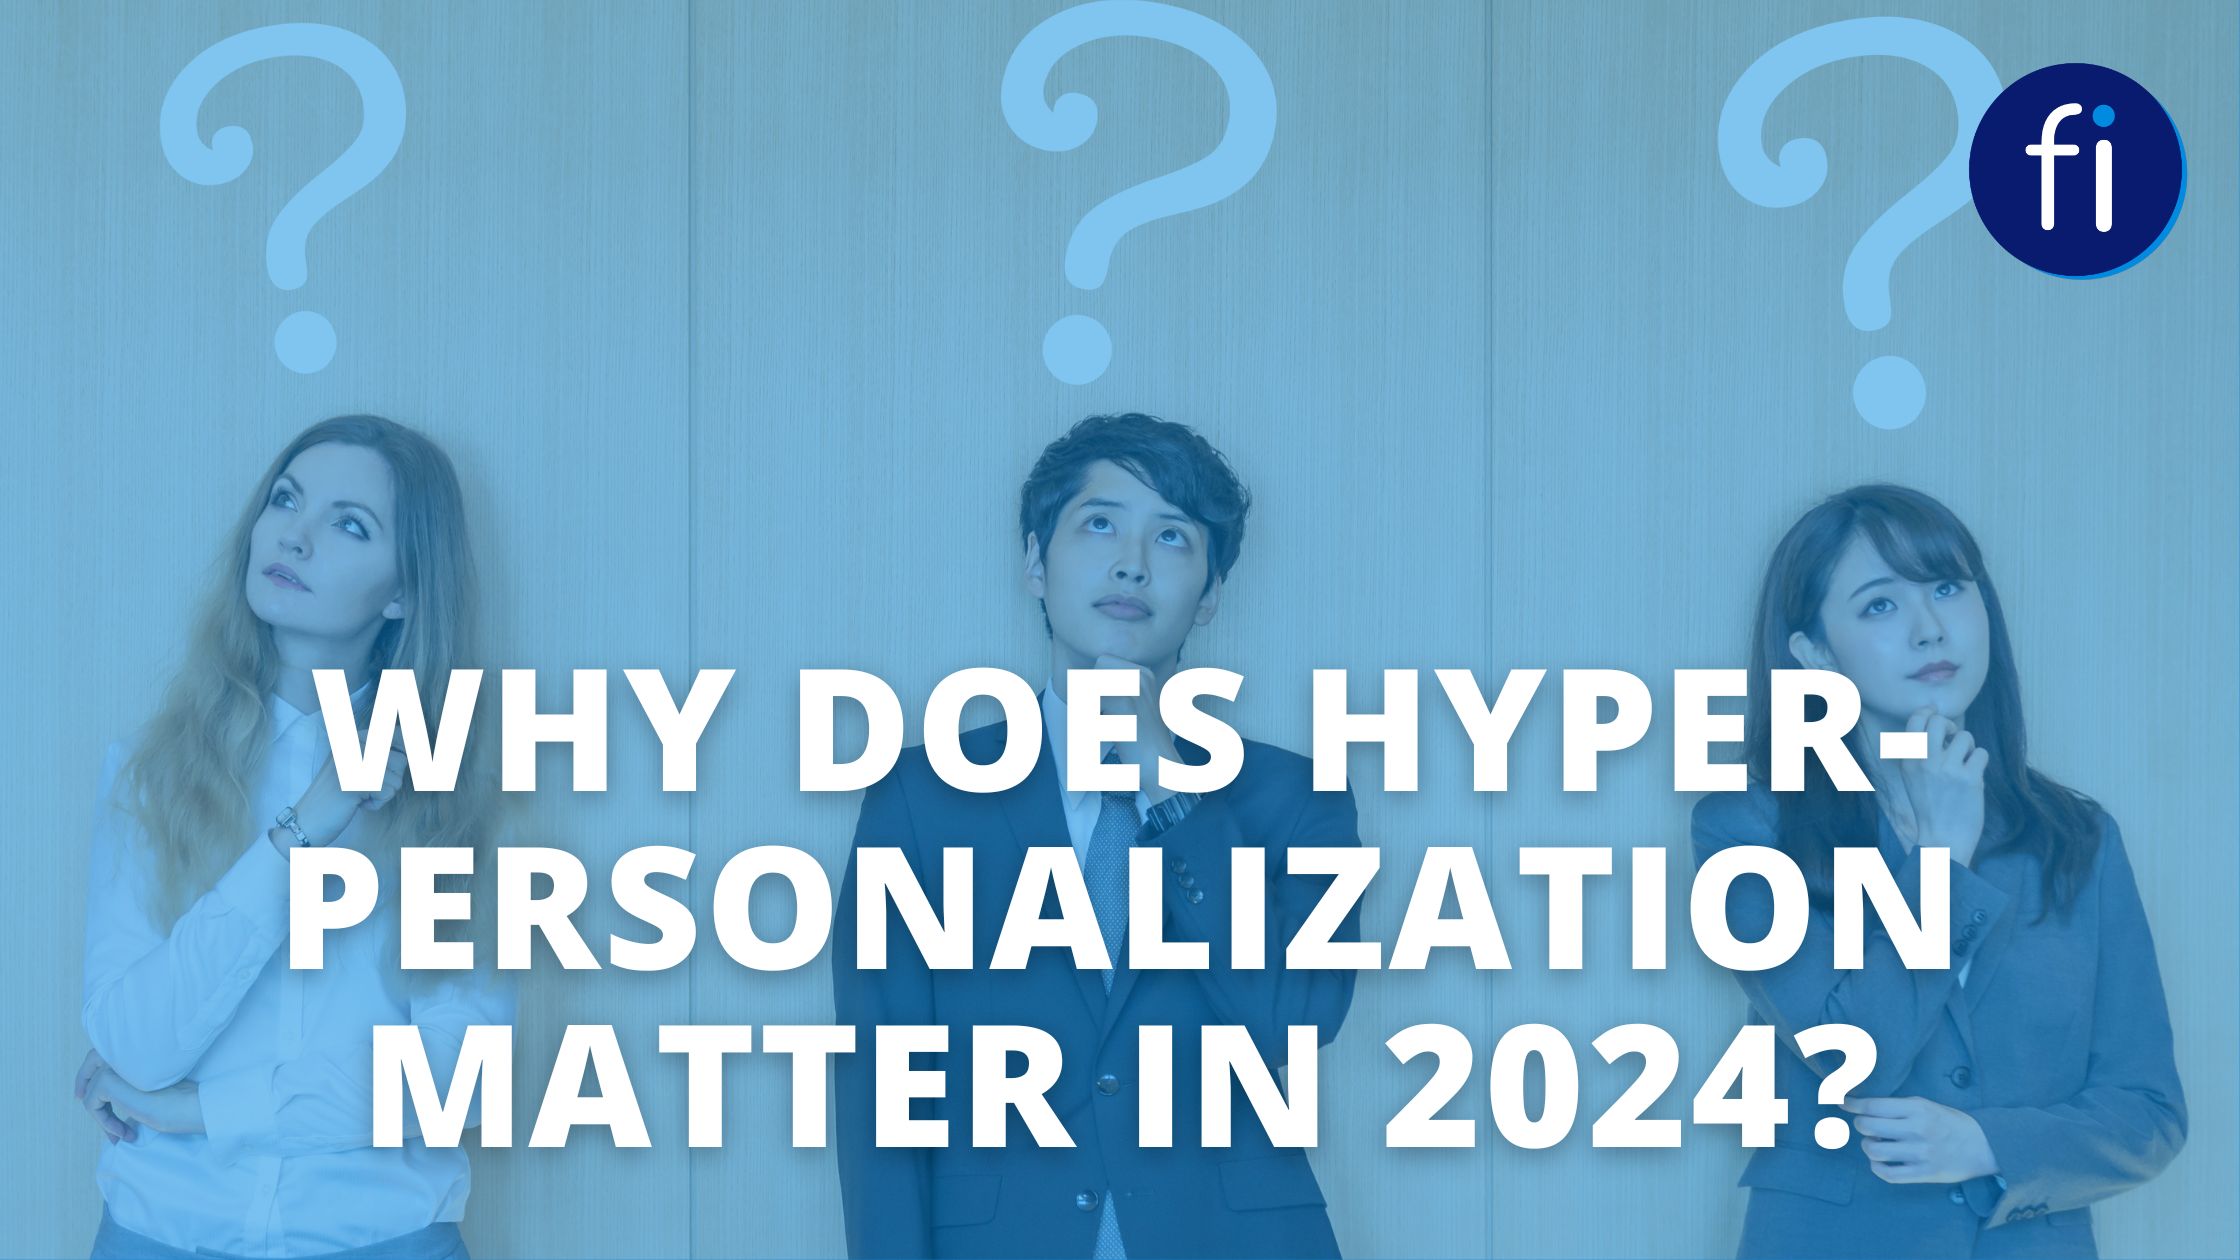 Why Does Hyper-Personalization Matter in 2024?